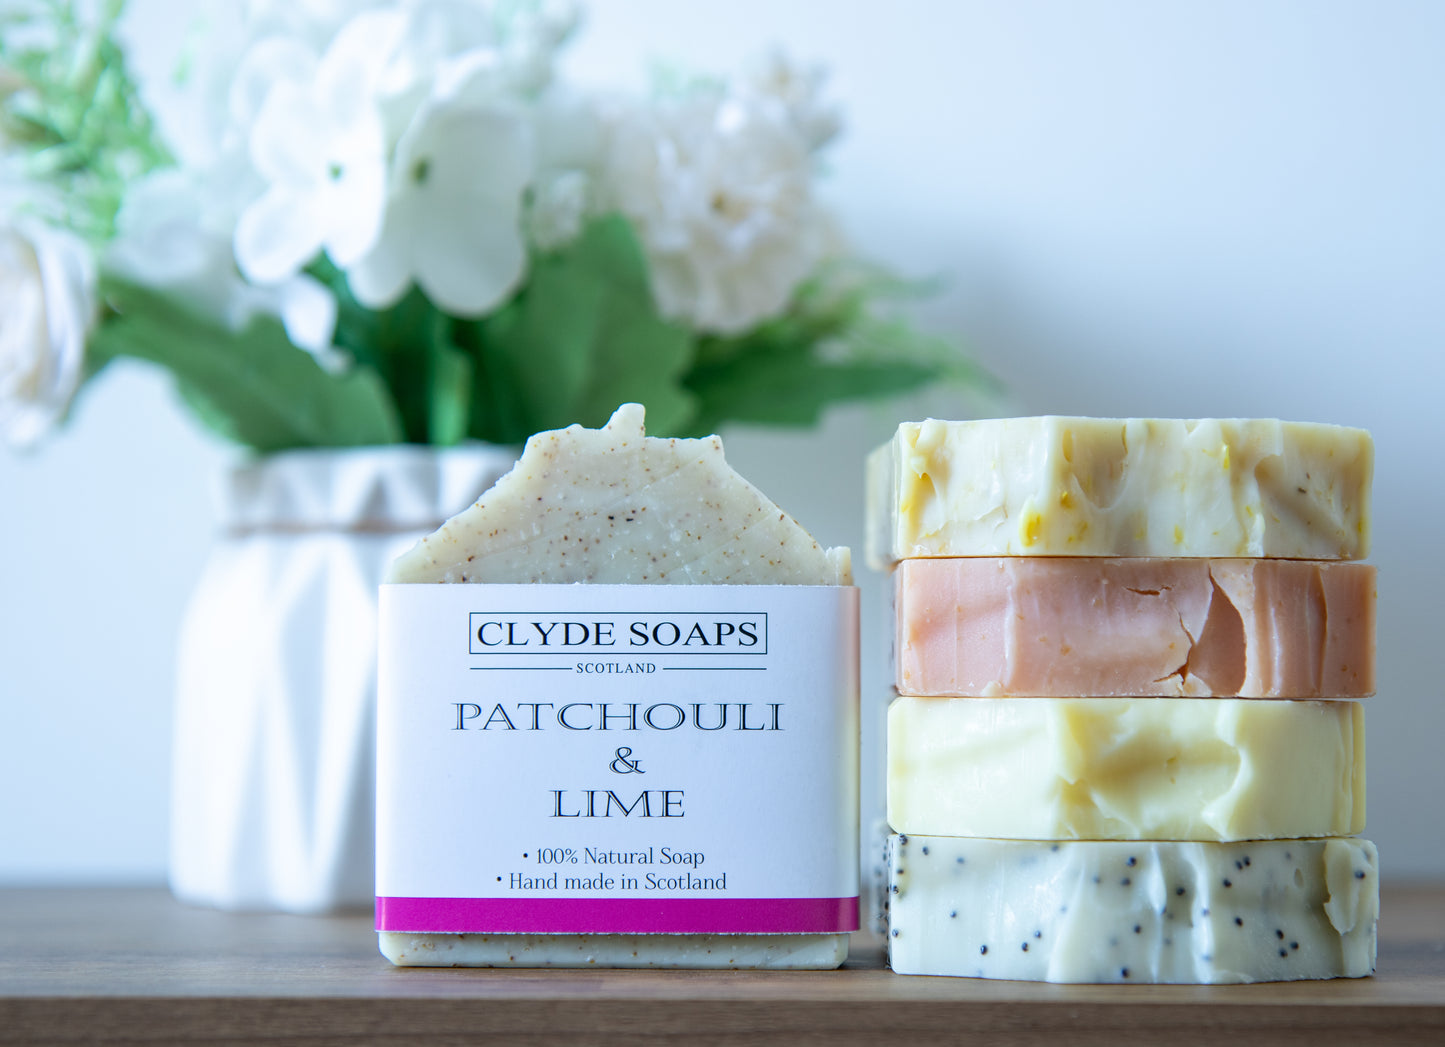 Patchouli and Lime Soap - Clyde Soaps , Cold Process, Palm Oil & Plastic Free, Eco Gift, UK Handmade Vegan, Cruelty Free, Artisan Soap